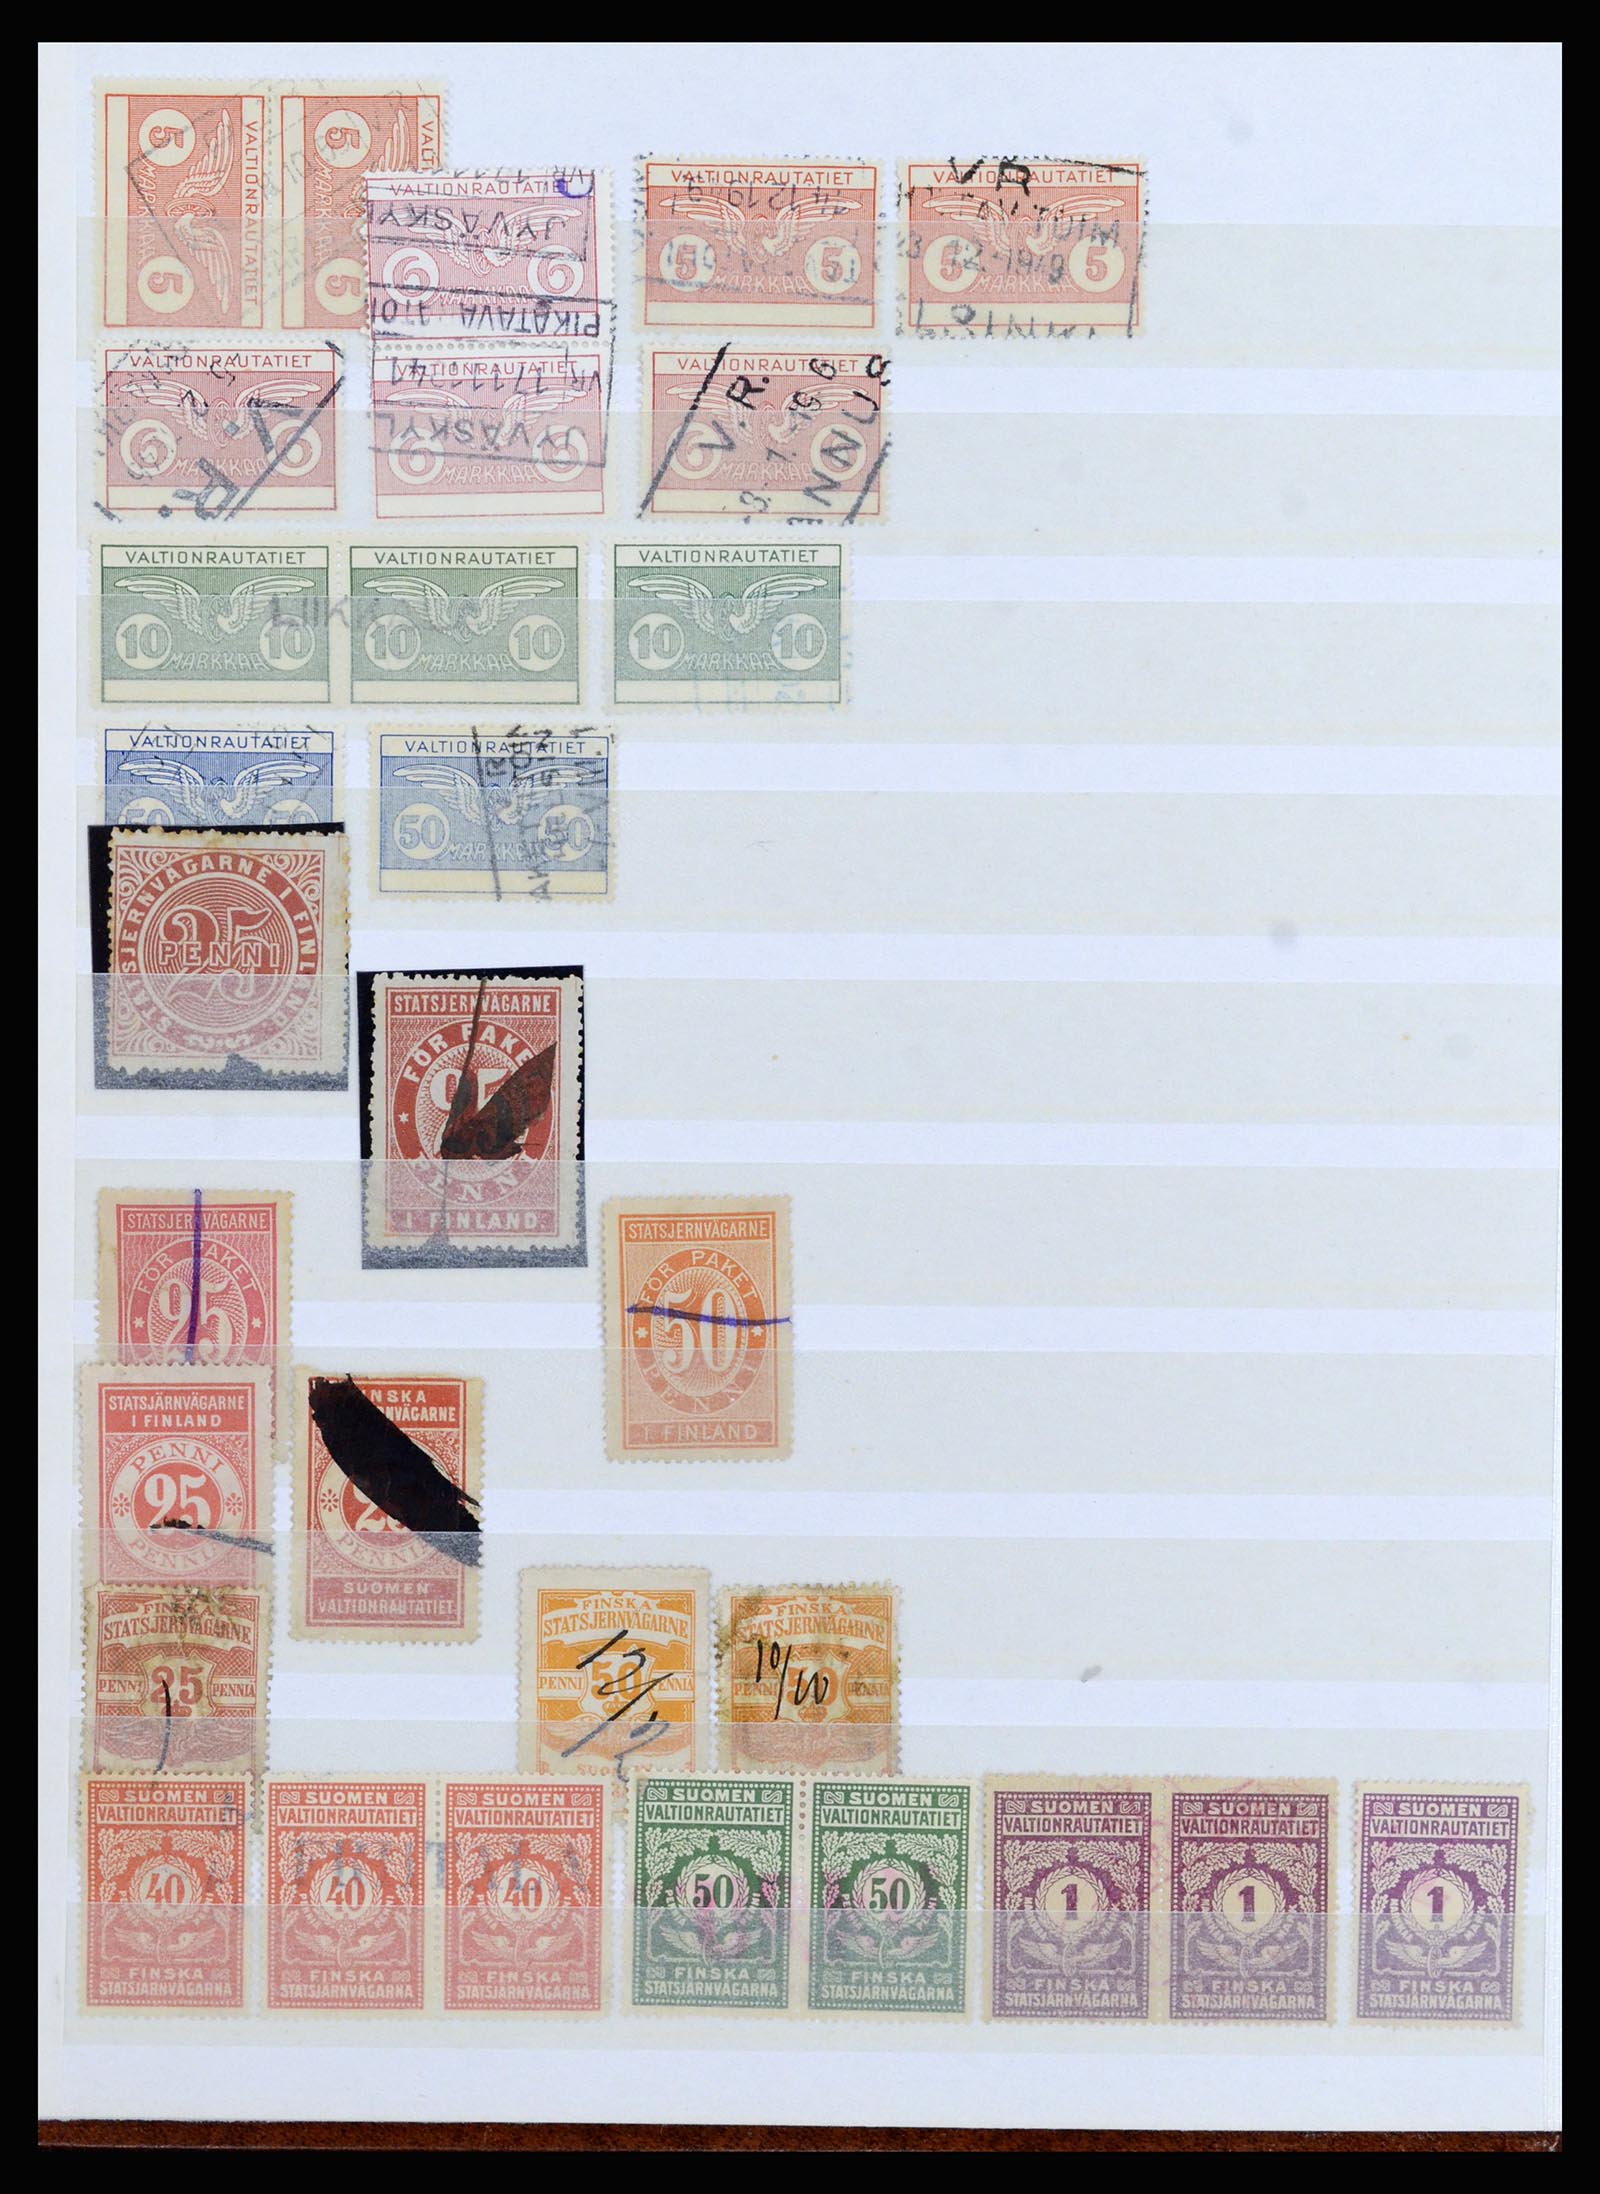 36981 033 - Stamp collection 36981 Scandinavia railroadstamps.